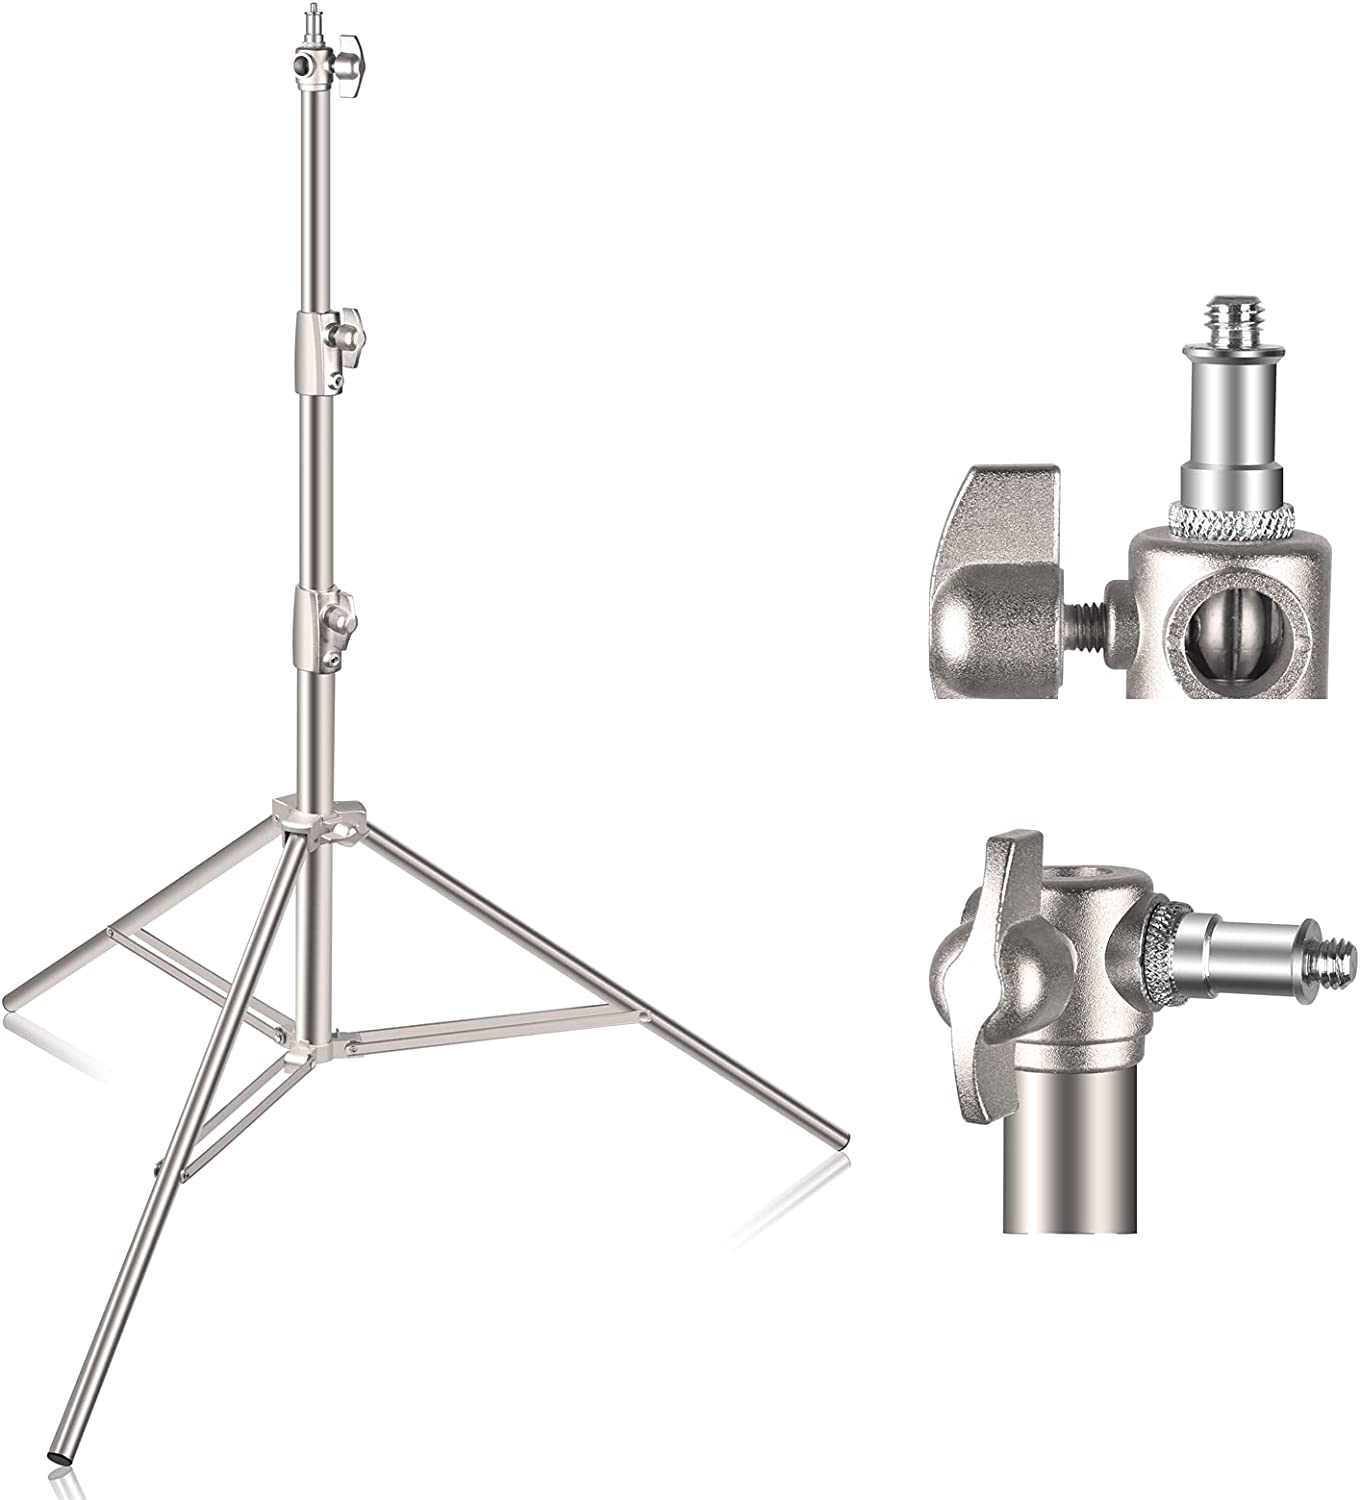 9.2ft/2.8m Stainless Steel Light Stand, Spring Cushioned